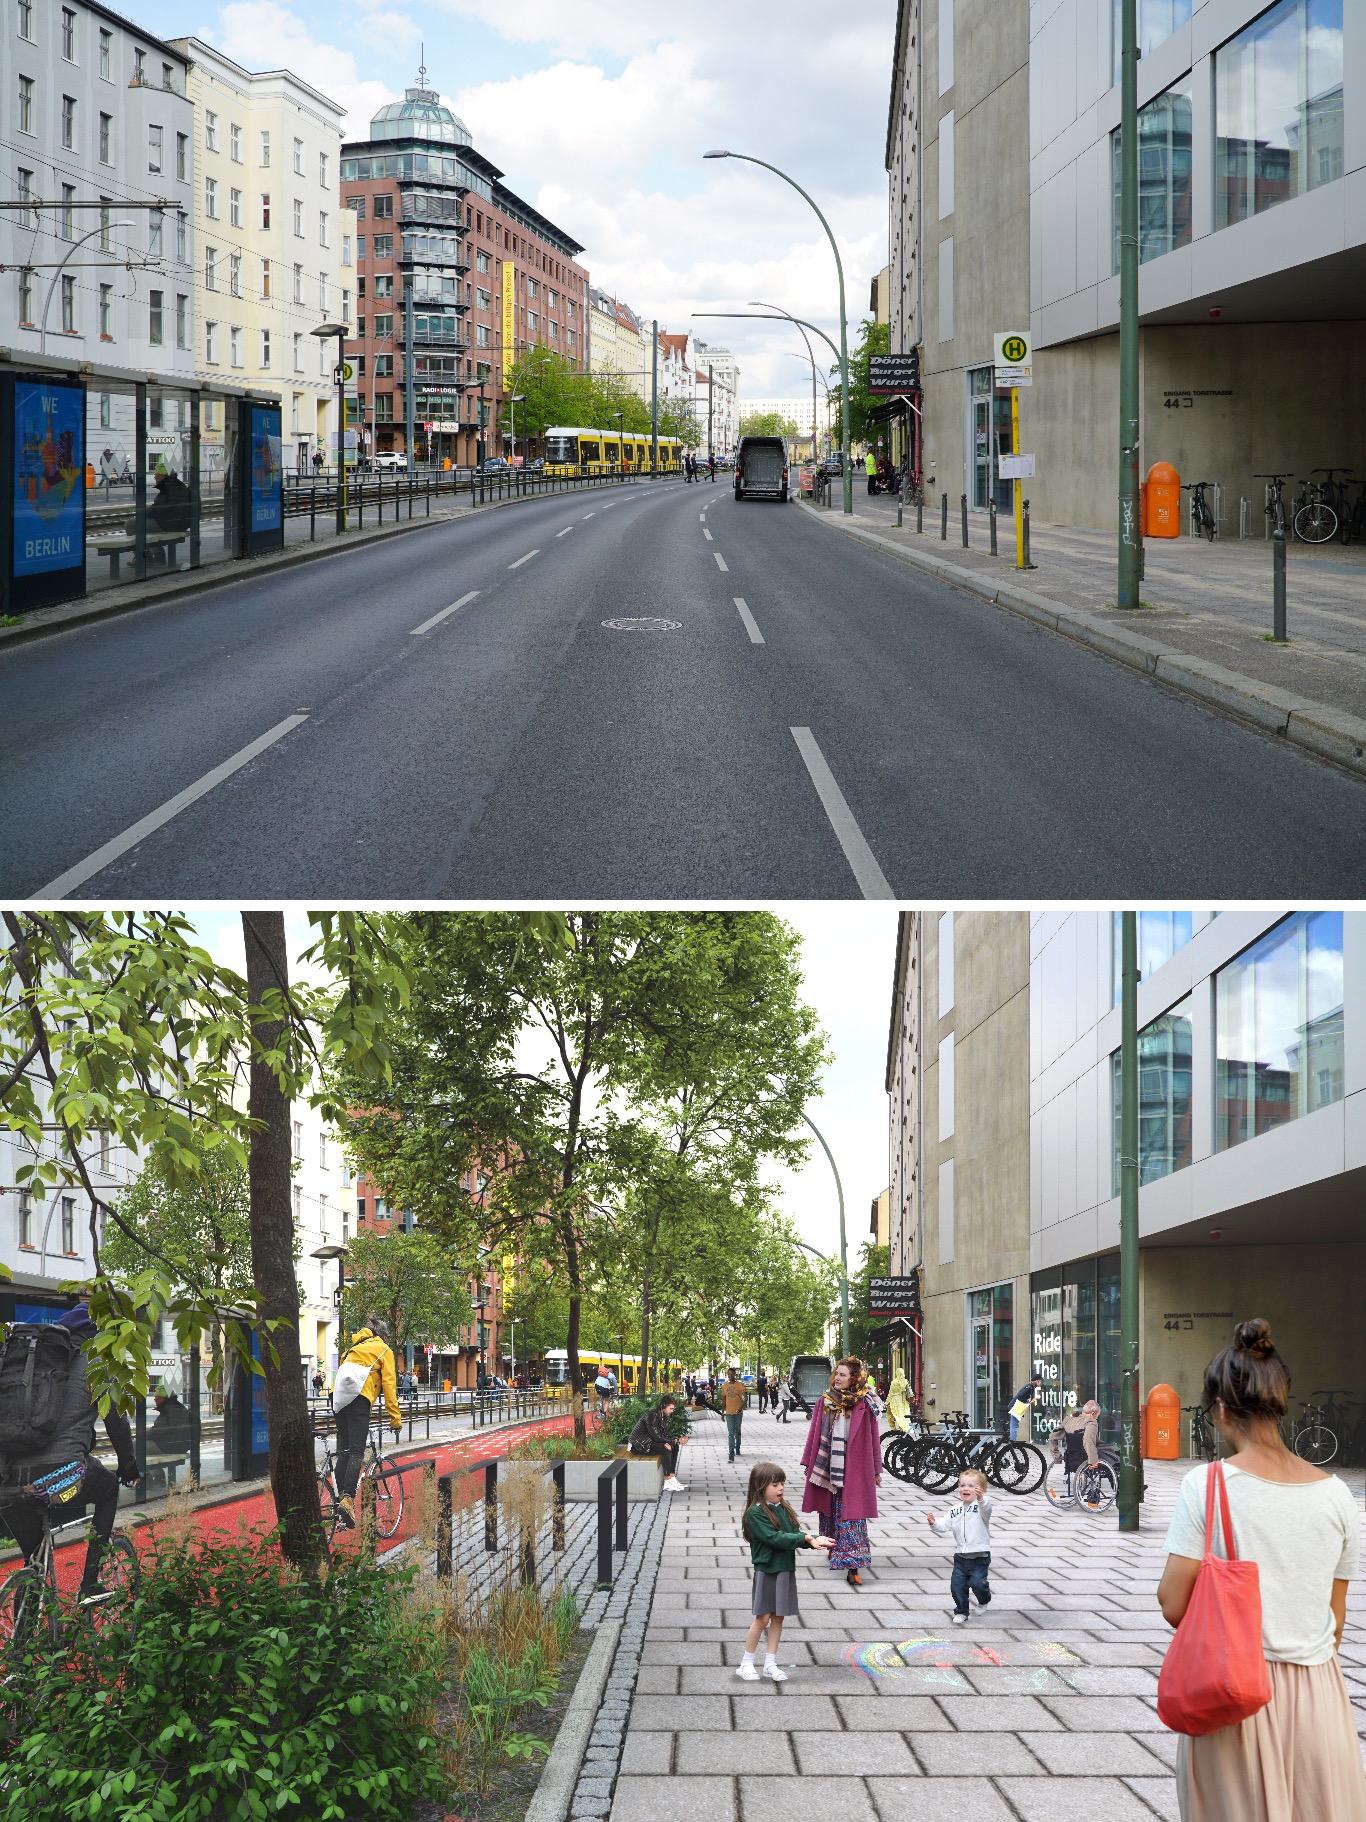 Nevertheless, in the city center, cars still crowd roads and parking spaces, trends highlighted by campaigners in renderings showing how Berlin roads look today and how they might appear without cars.